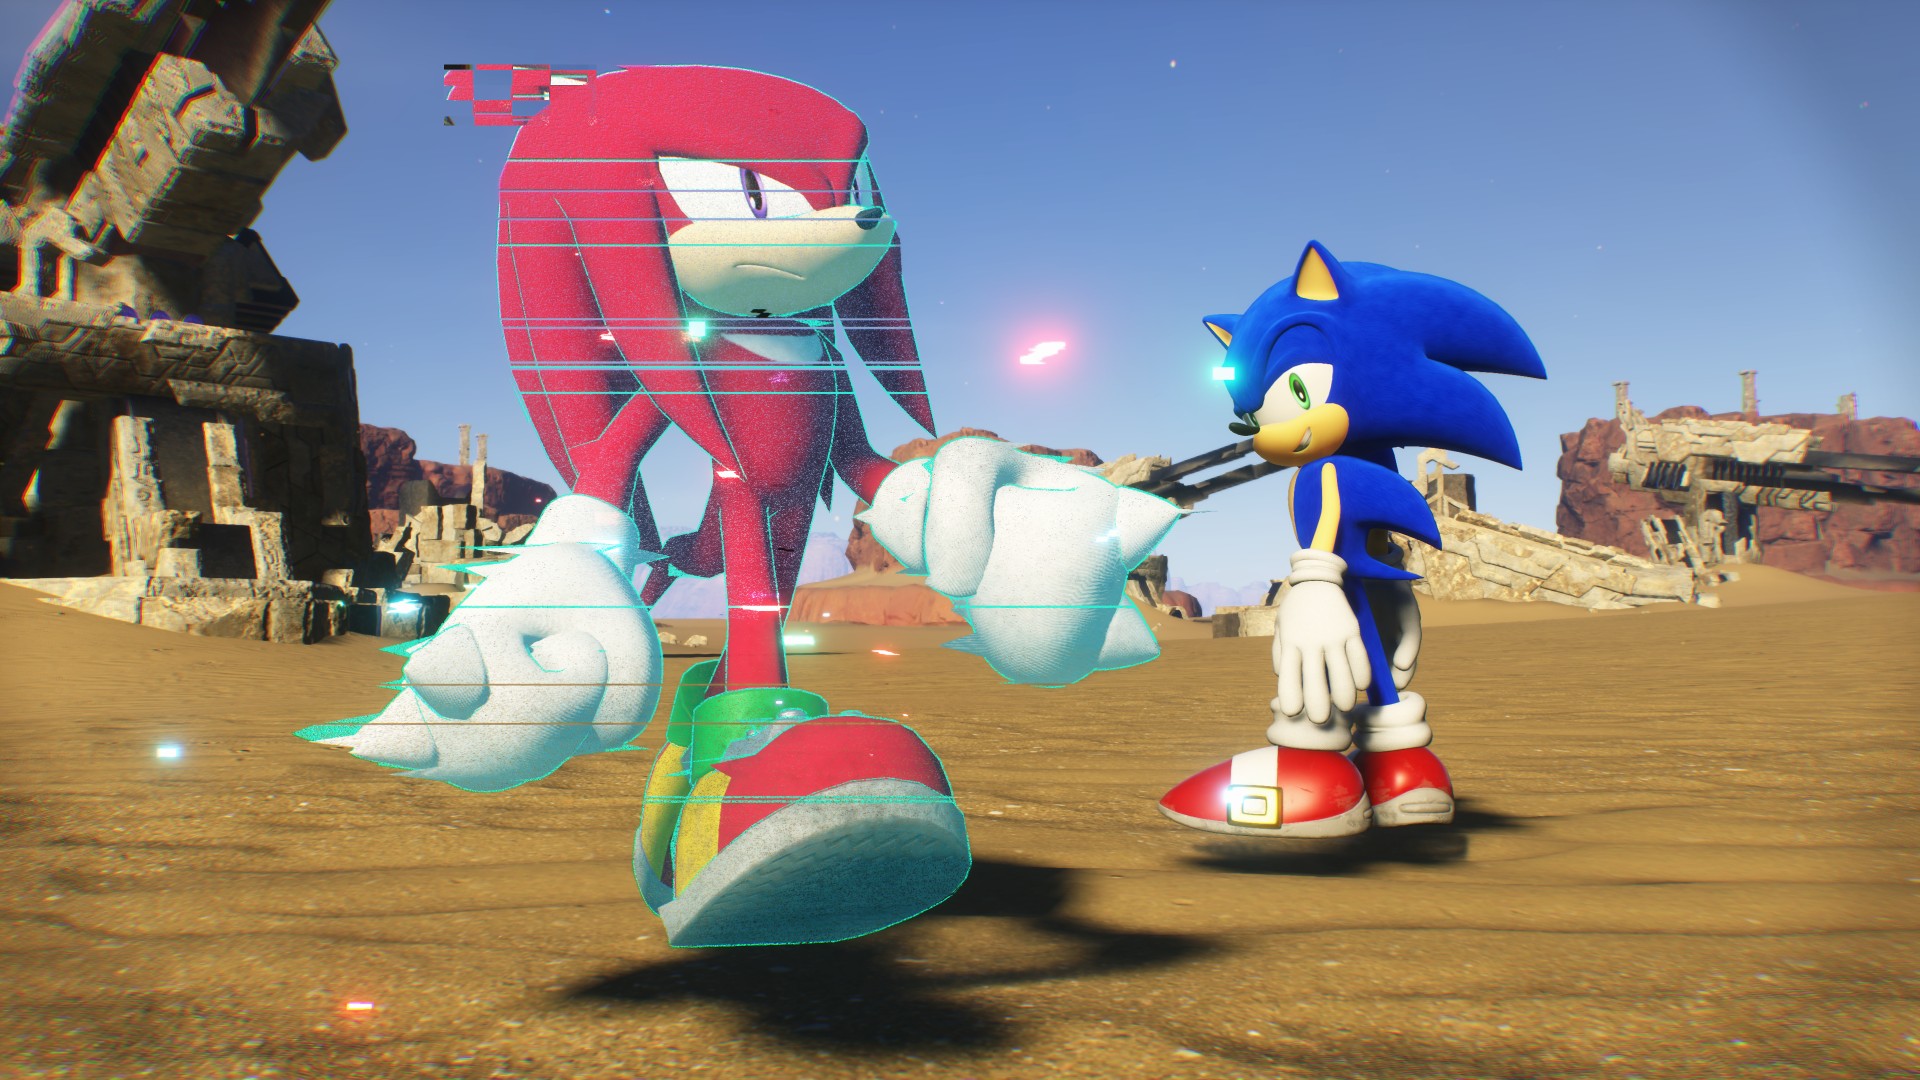 Sonic the Hedgehog 2' drops two exciting teasers